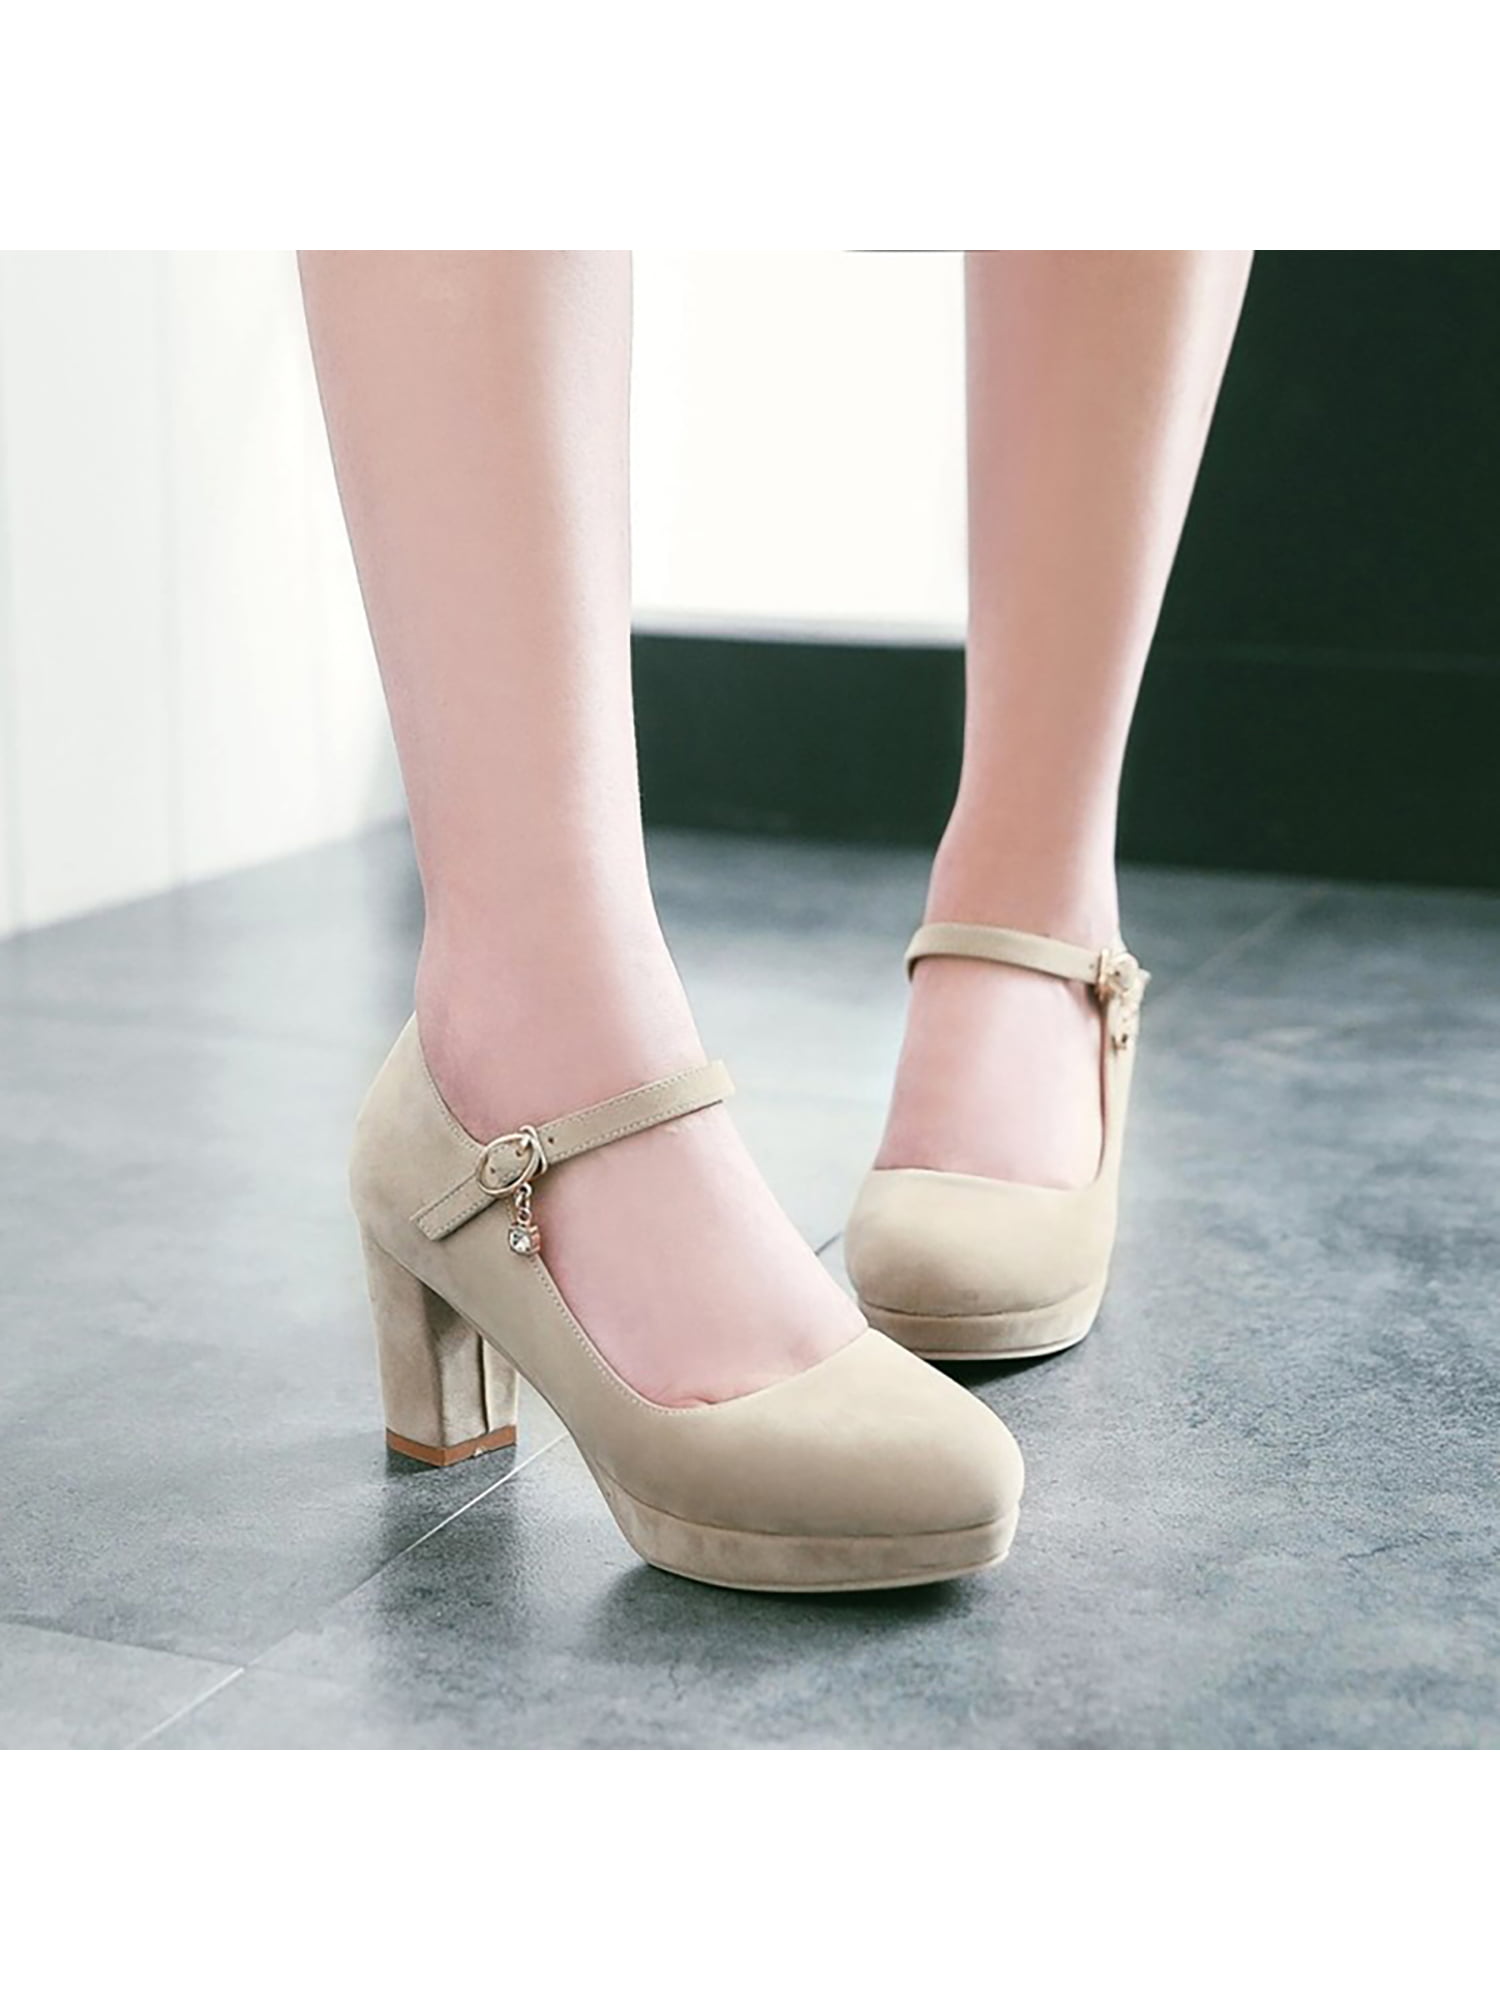 Details about   new Women Platform Chunky Heel Pumps High Heel Round Toe Ankle Boot Oxford Shoes